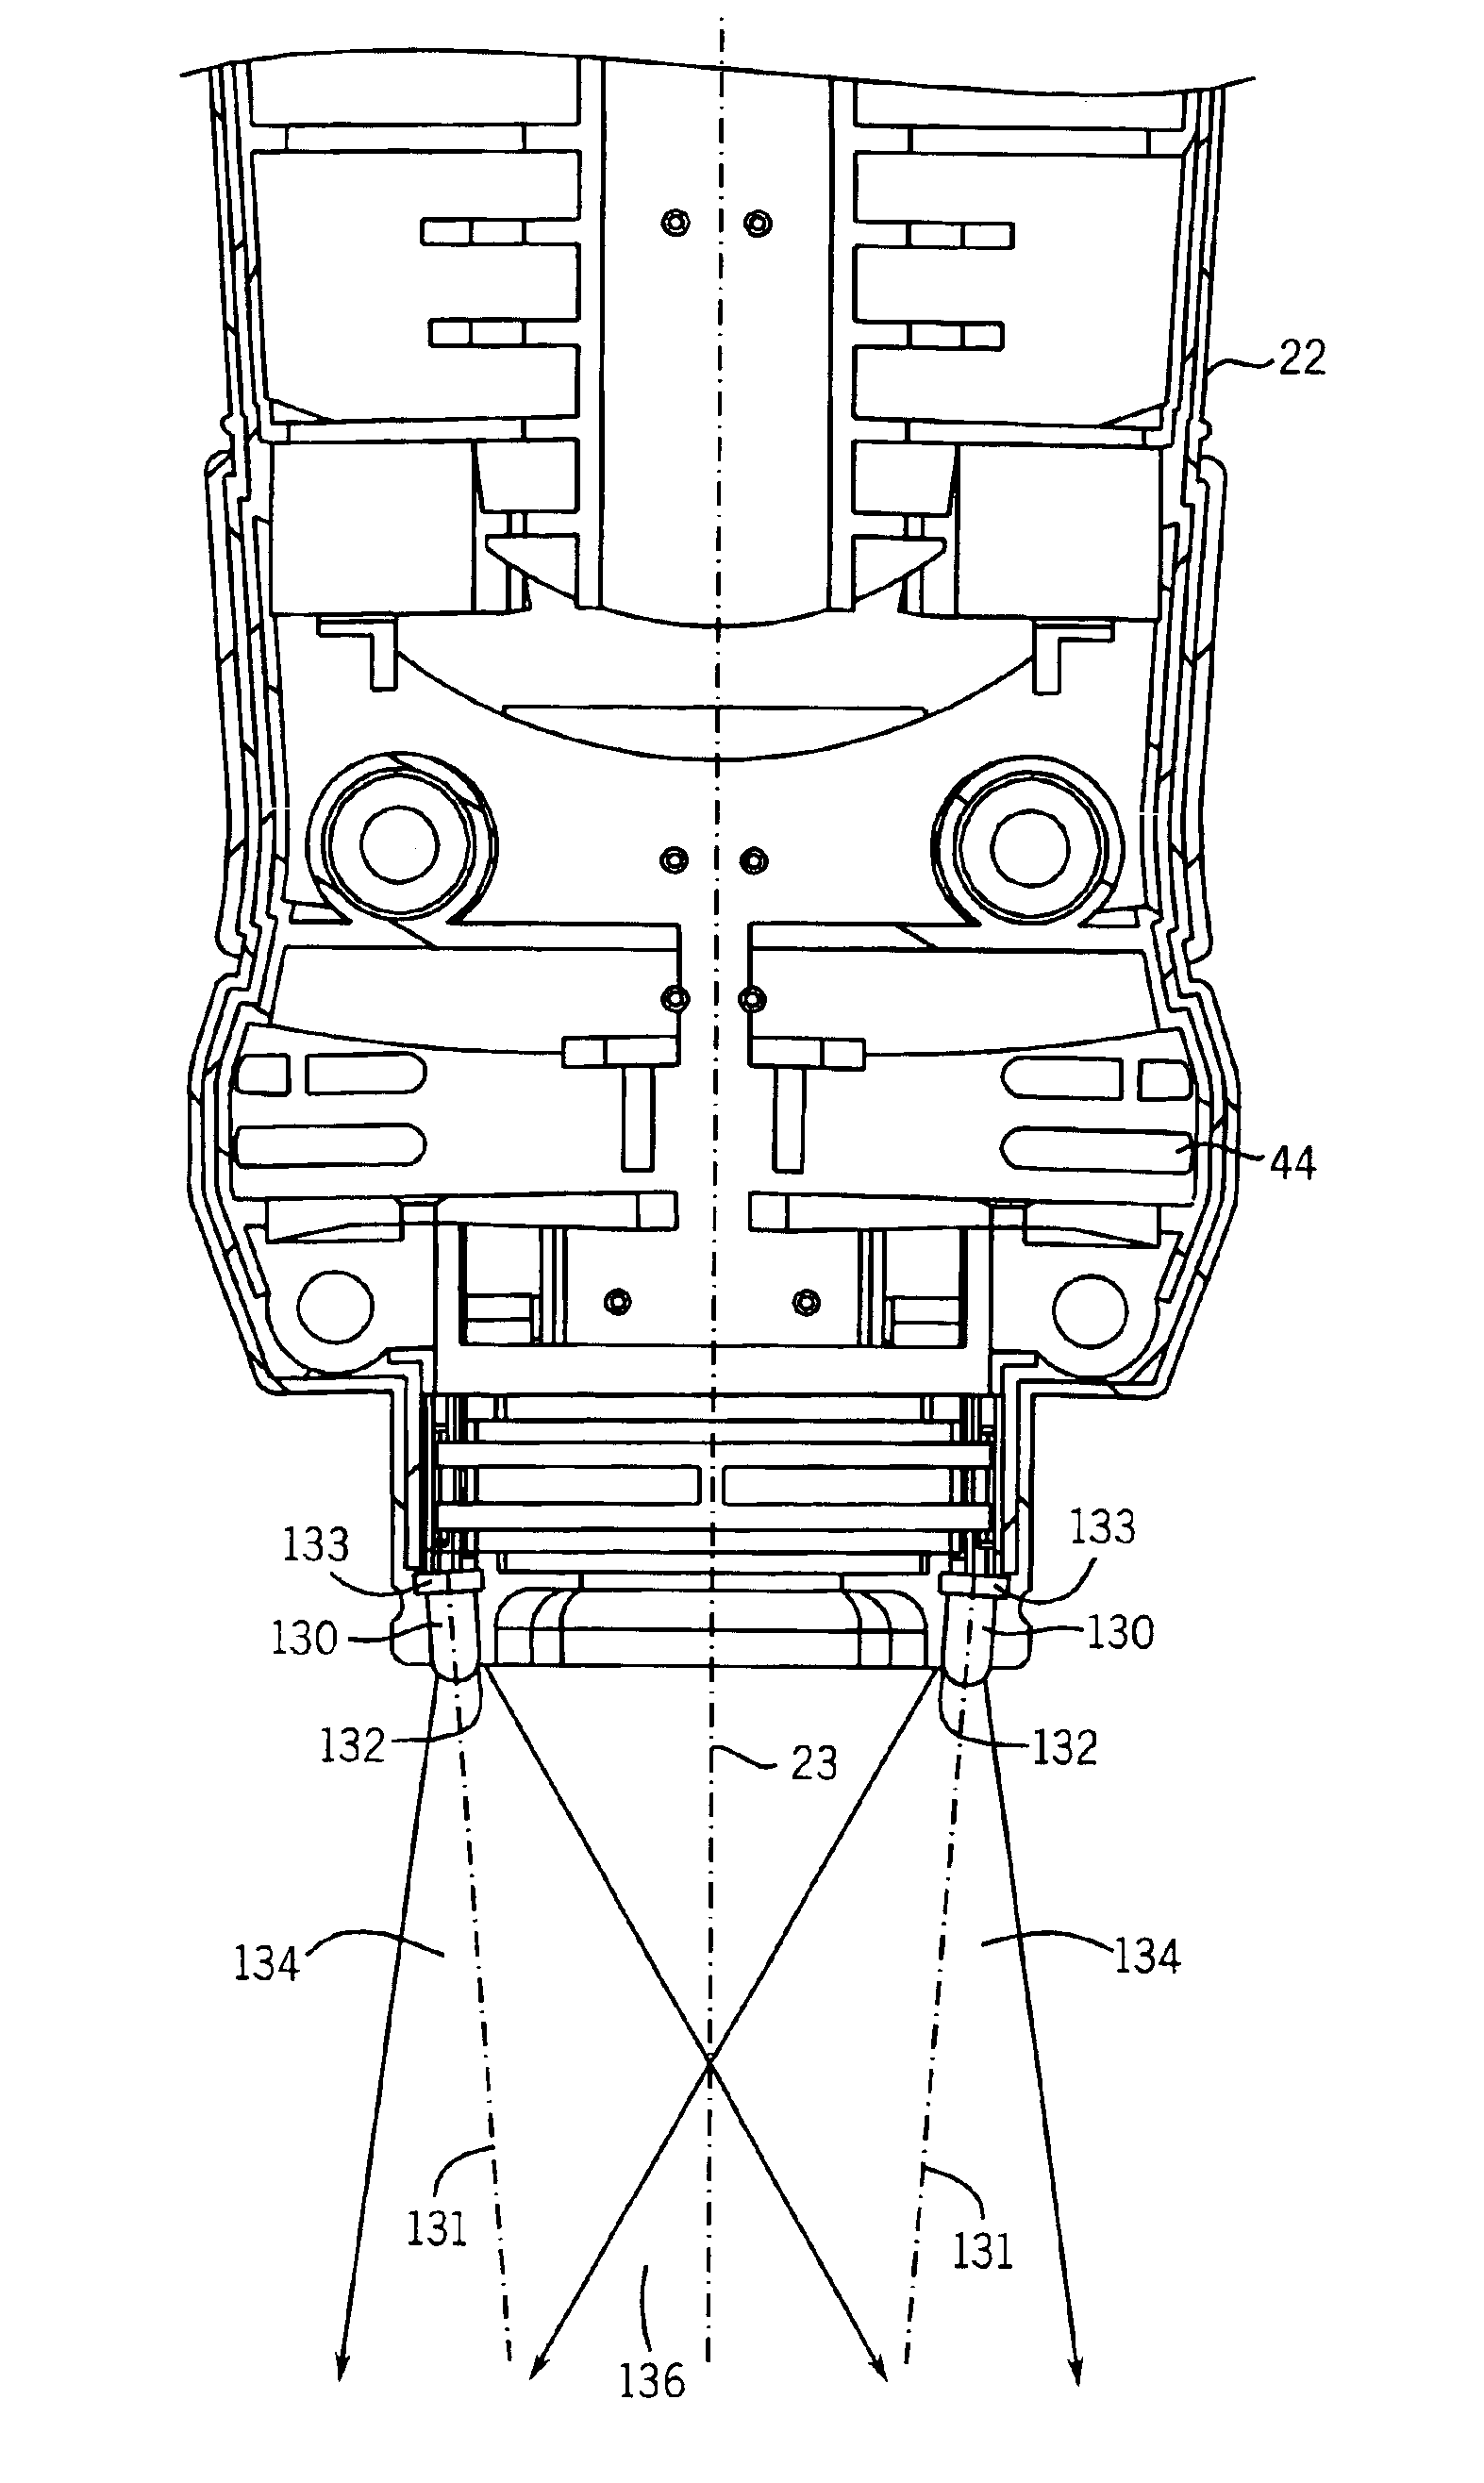 Power tool with light emitting diode